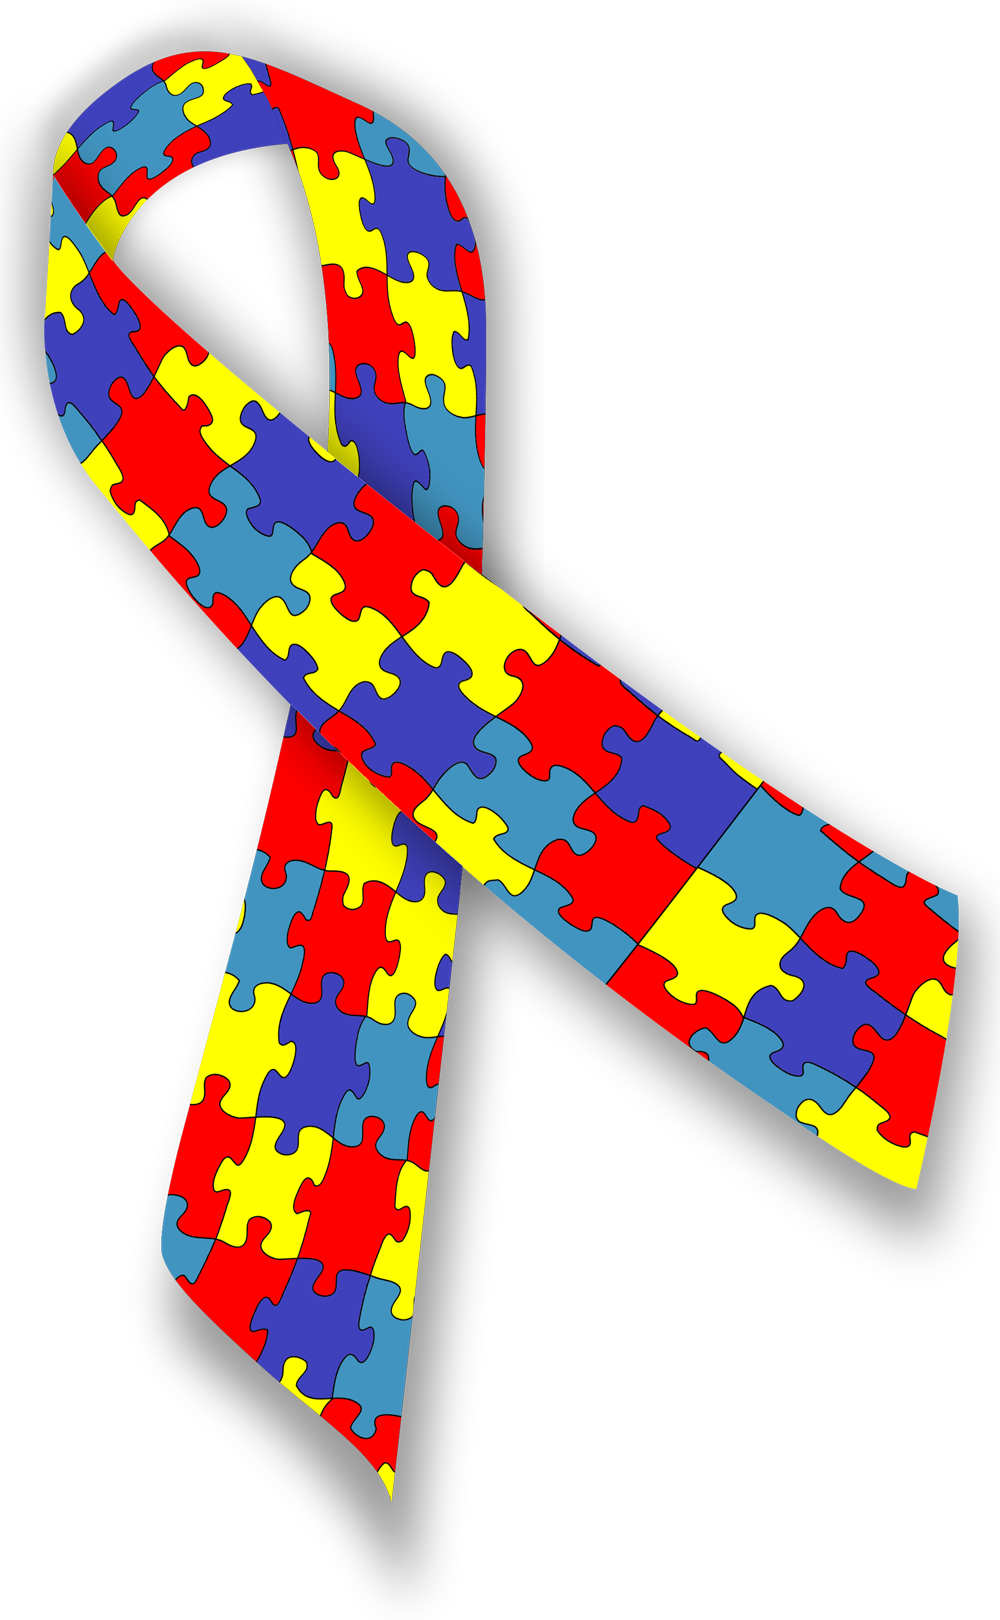 April was Autism Awareness Month, the symbol for which is shown above.